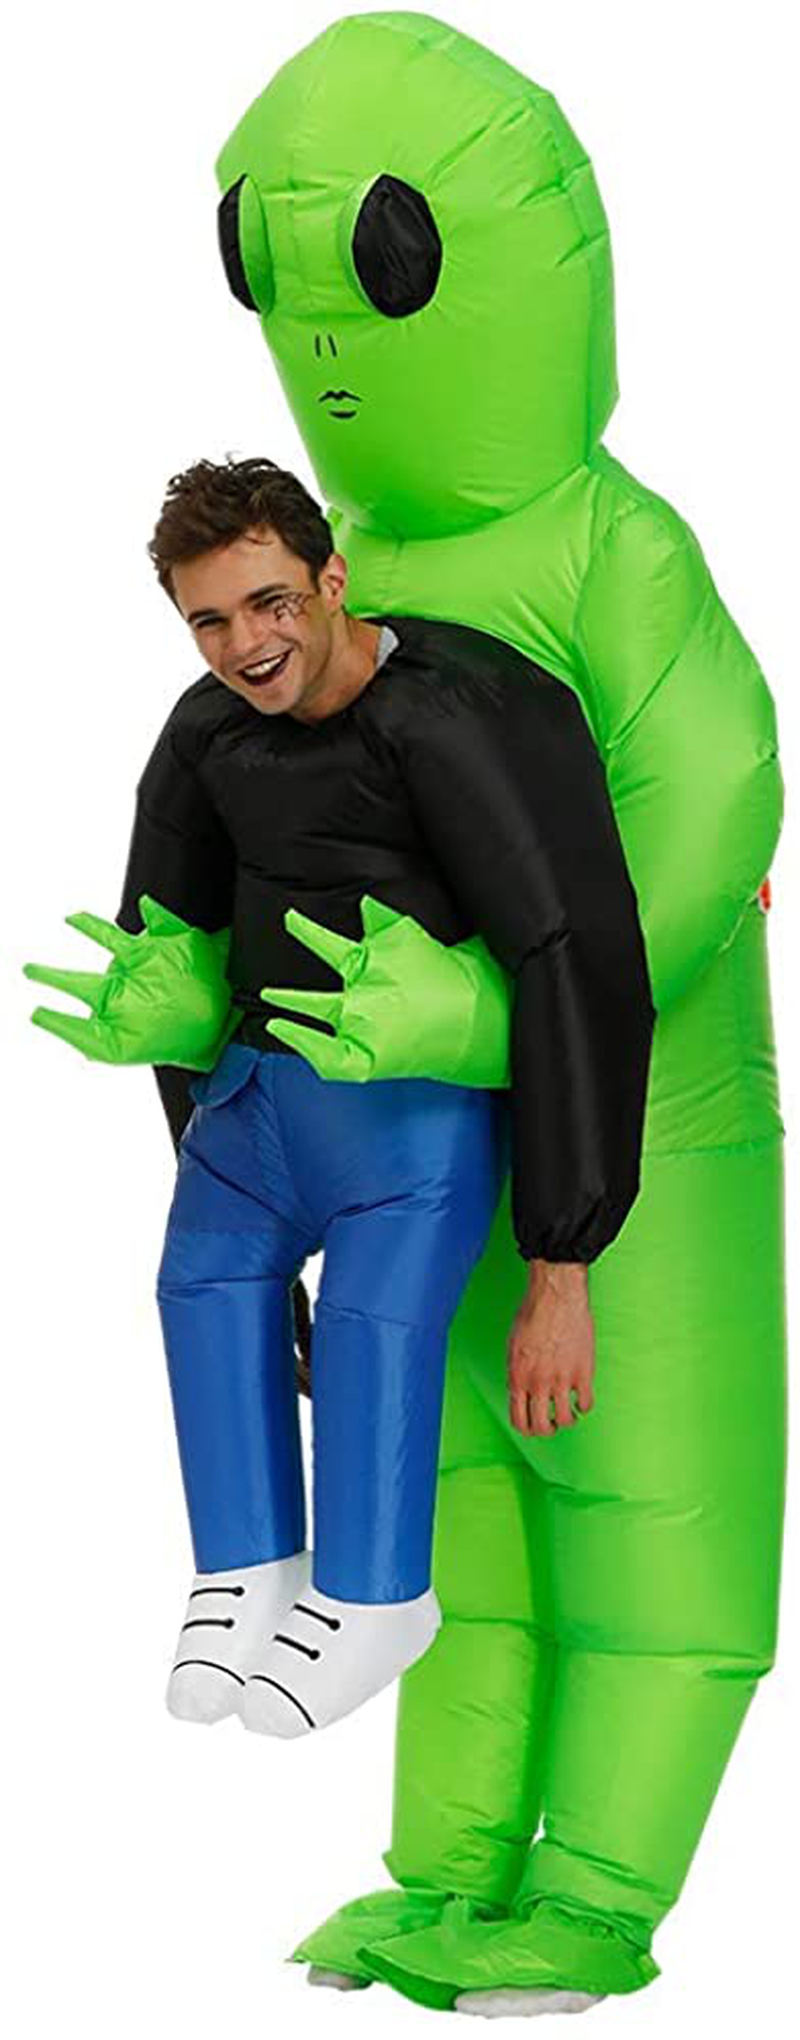 Kooy Inflatable Alien Costume for Adult (Adult - Et Alien) Apparel & Accessories > Costumes & Accessories > Costumes KOOY   